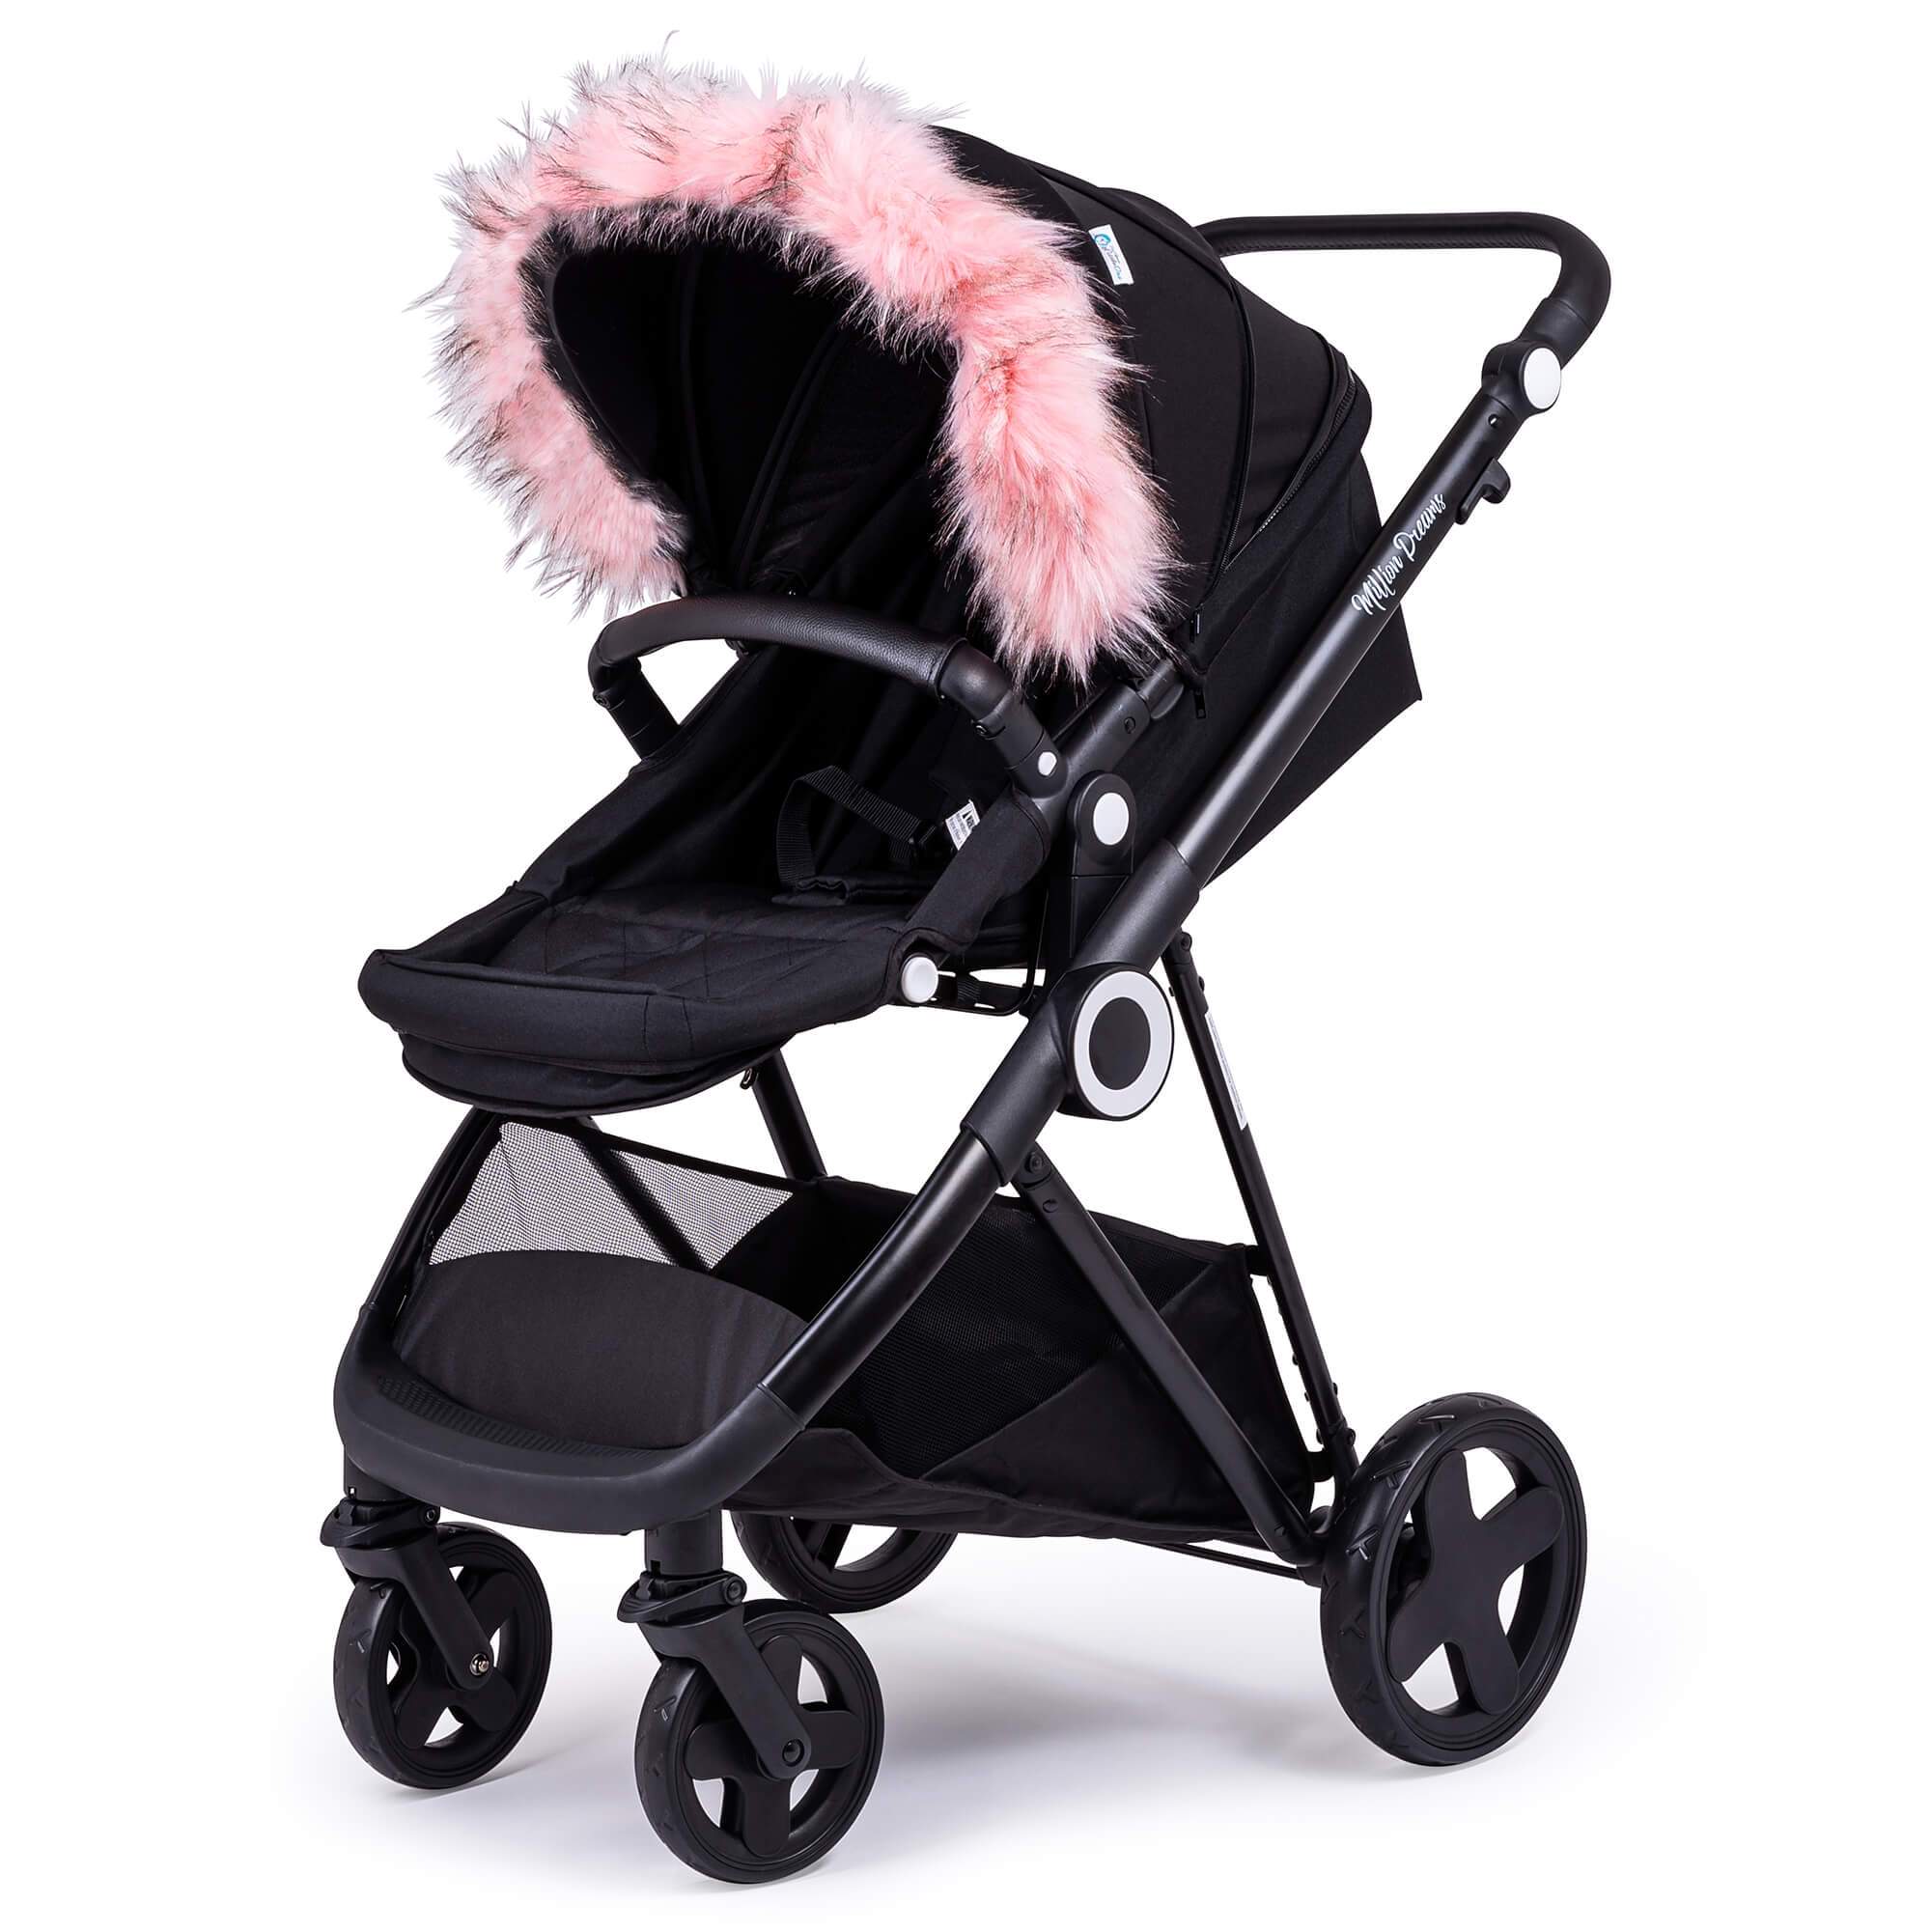 Pram Fur Hood Trim Attachment for Pushchair Compatible with Tippitoes - Light Pink / Fits All Models | For Your Little One